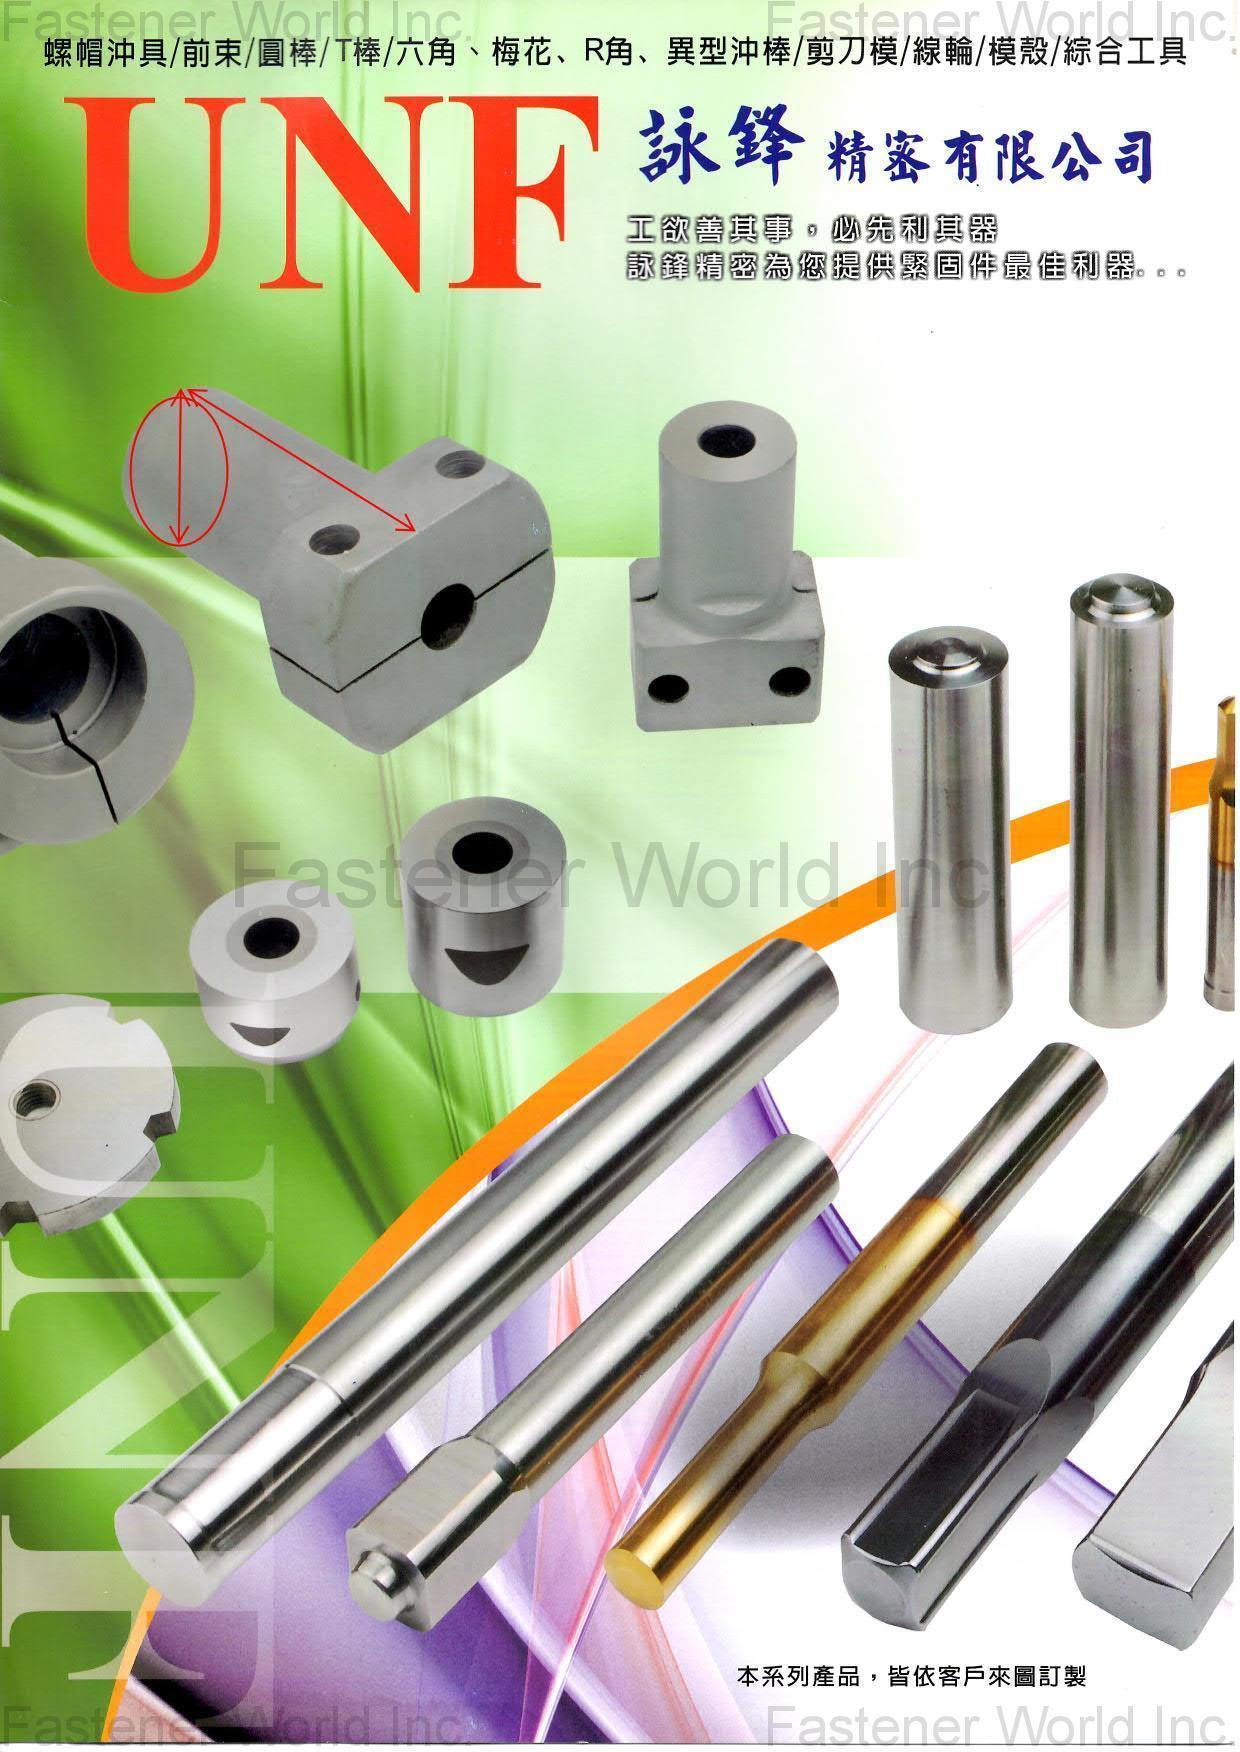 E-FONG DIE MANUFACTURE CO., LTD. , 2nd punch, ko-pin , Second Punch Cases